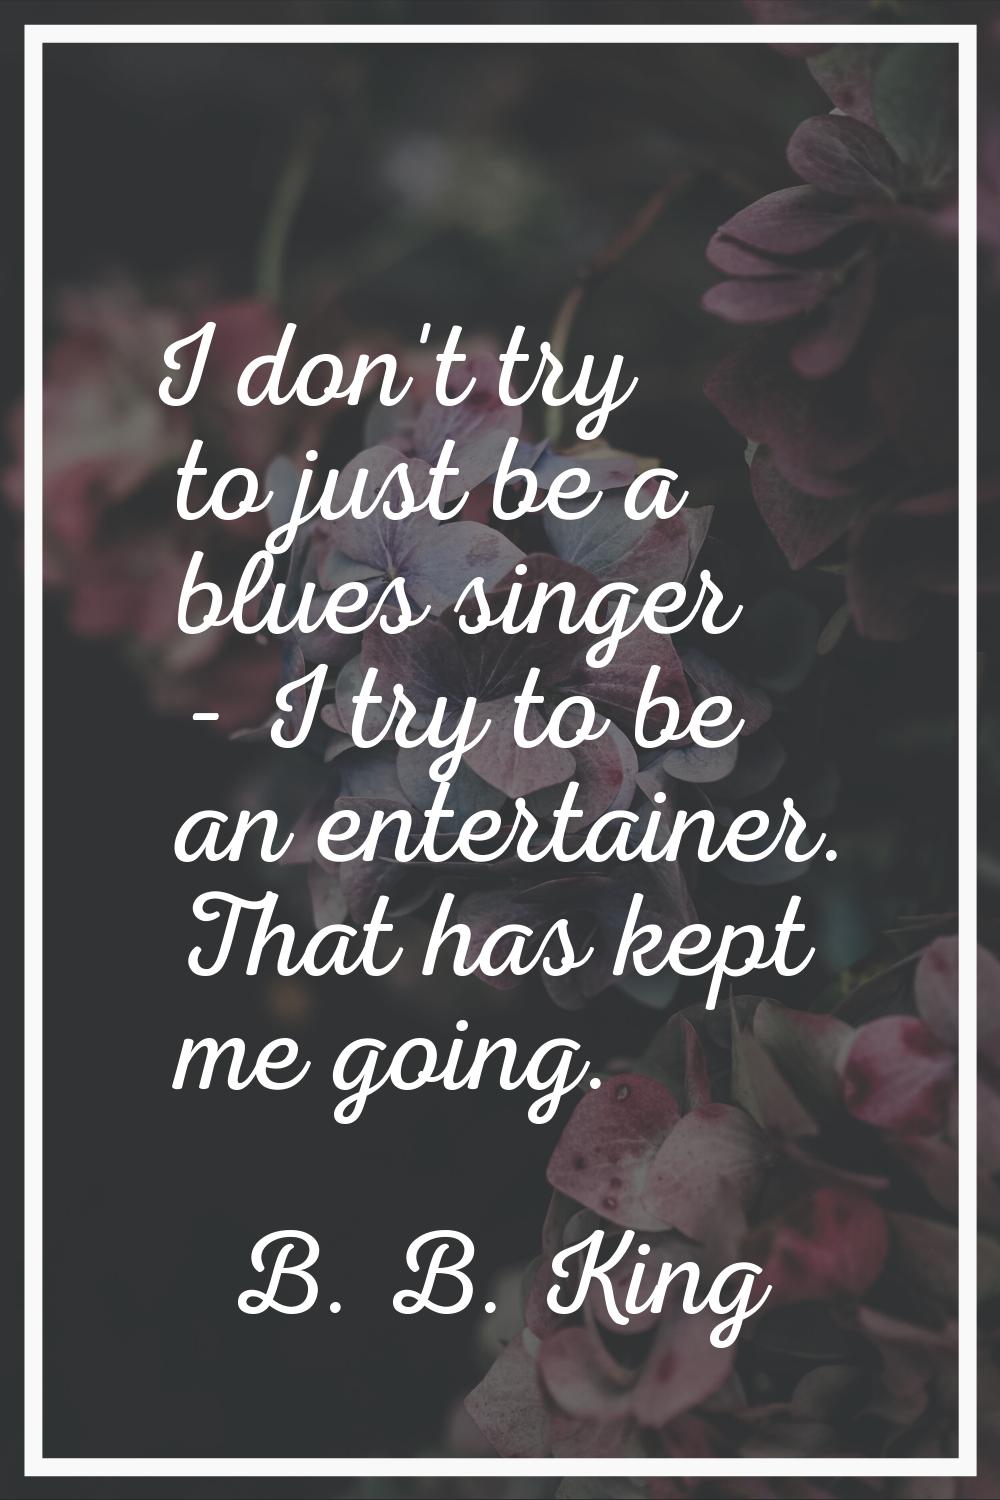 I don't try to just be a blues singer - I try to be an entertainer. That has kept me going.